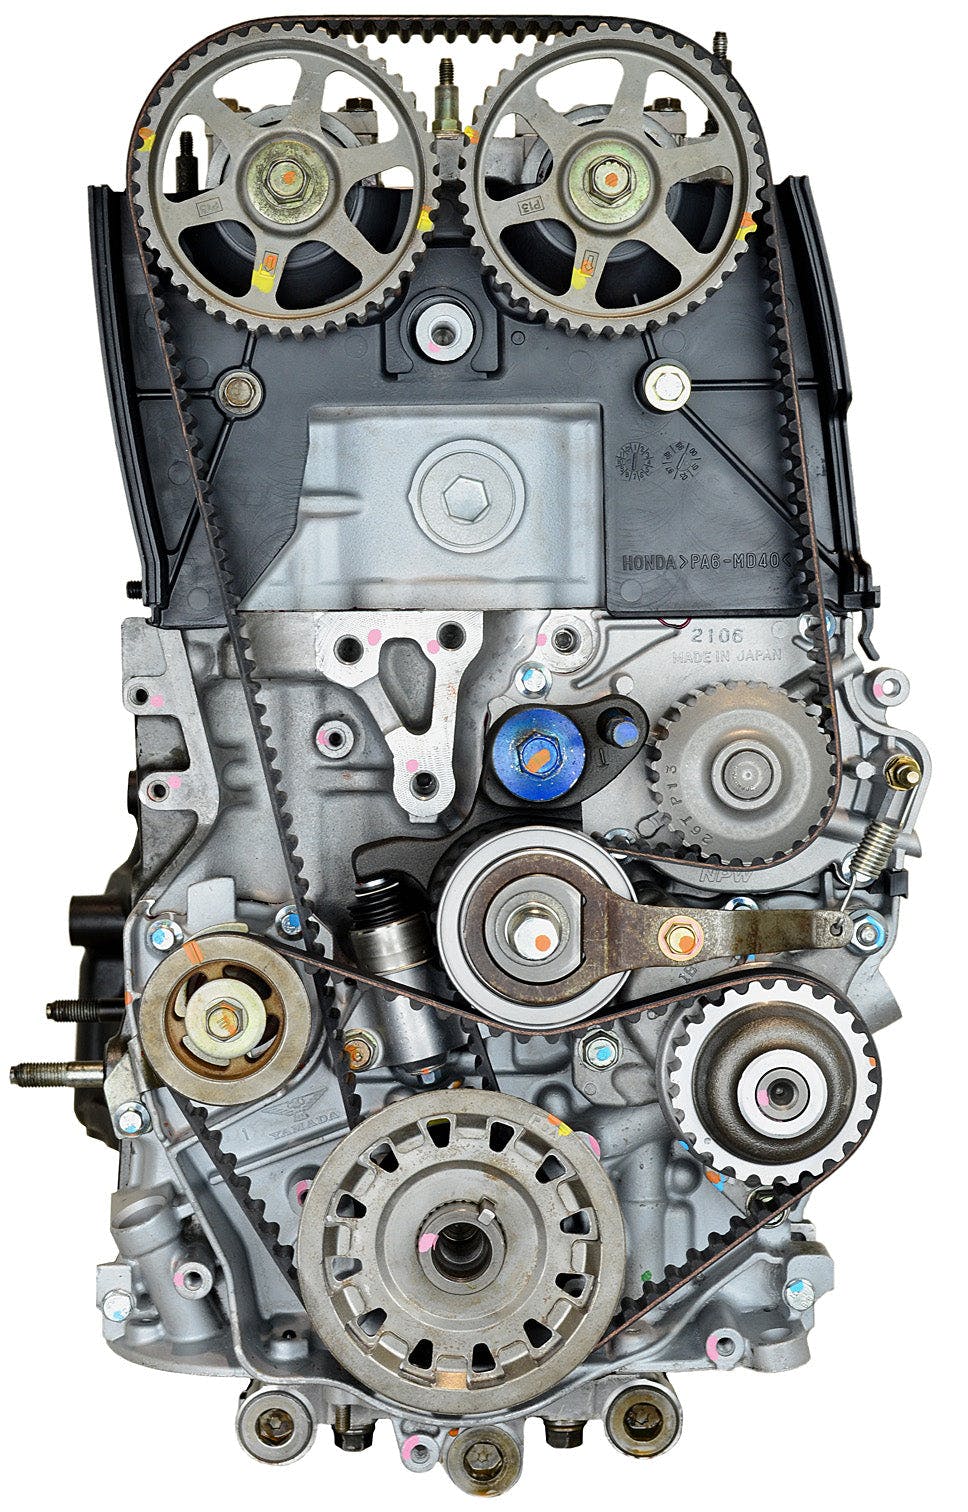 2.2L Inline-4 Engine for 1997-2001 Honda Prelude